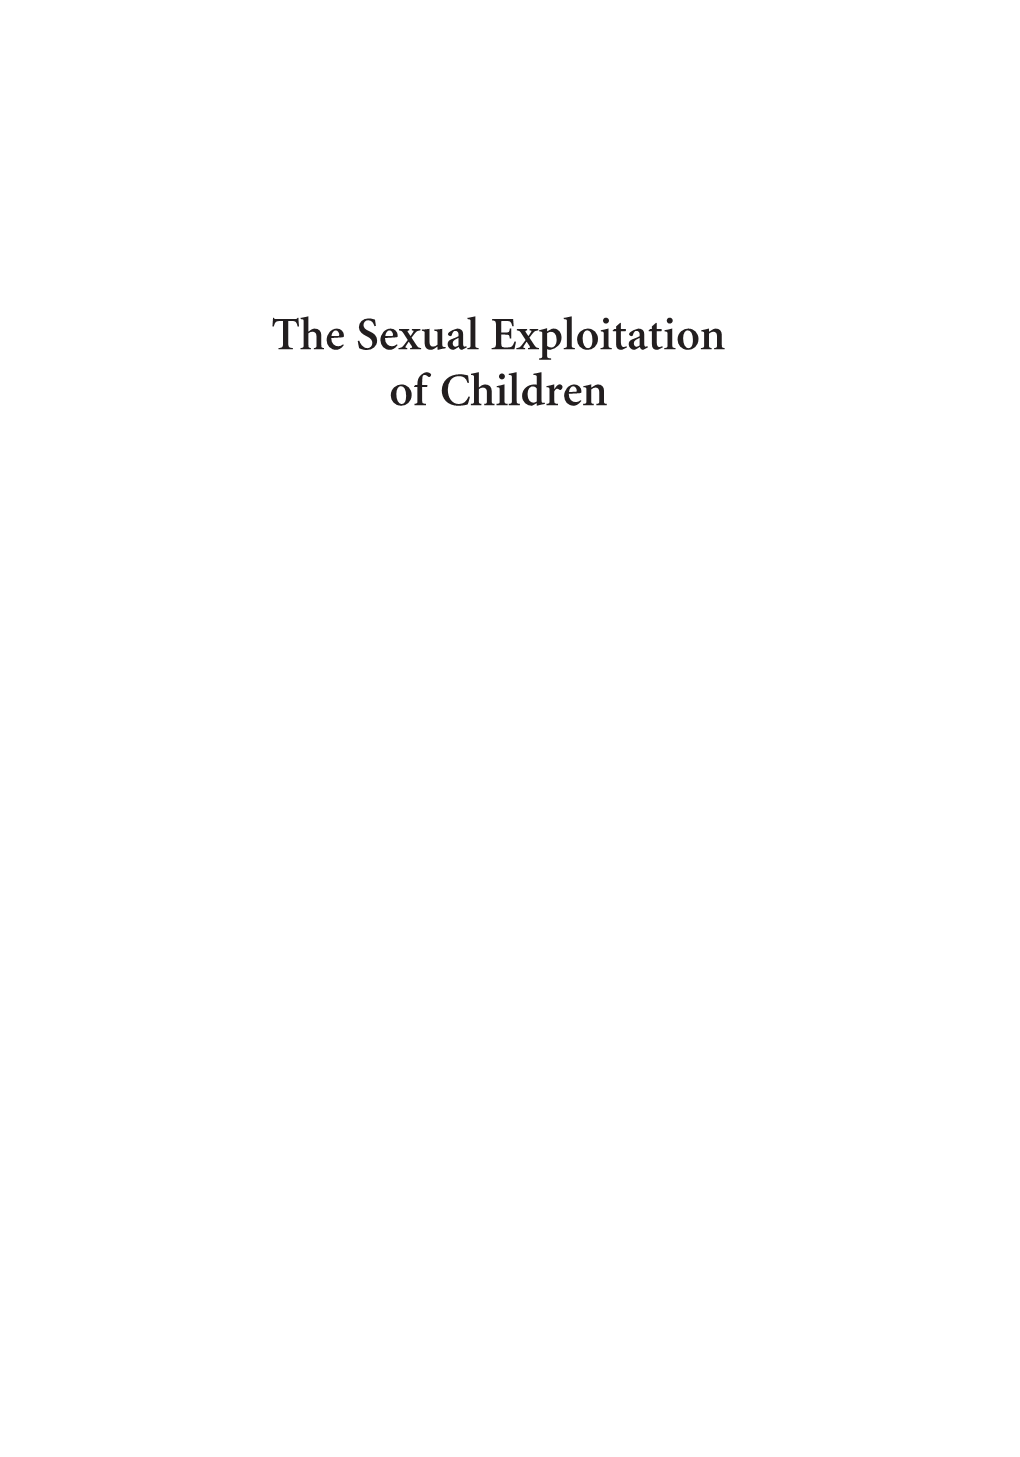 The Sexual Exploitation of Children Flannery Obrien 00 Fmt Auto Flip 1 2/1/16 3:38 PM Page Ii